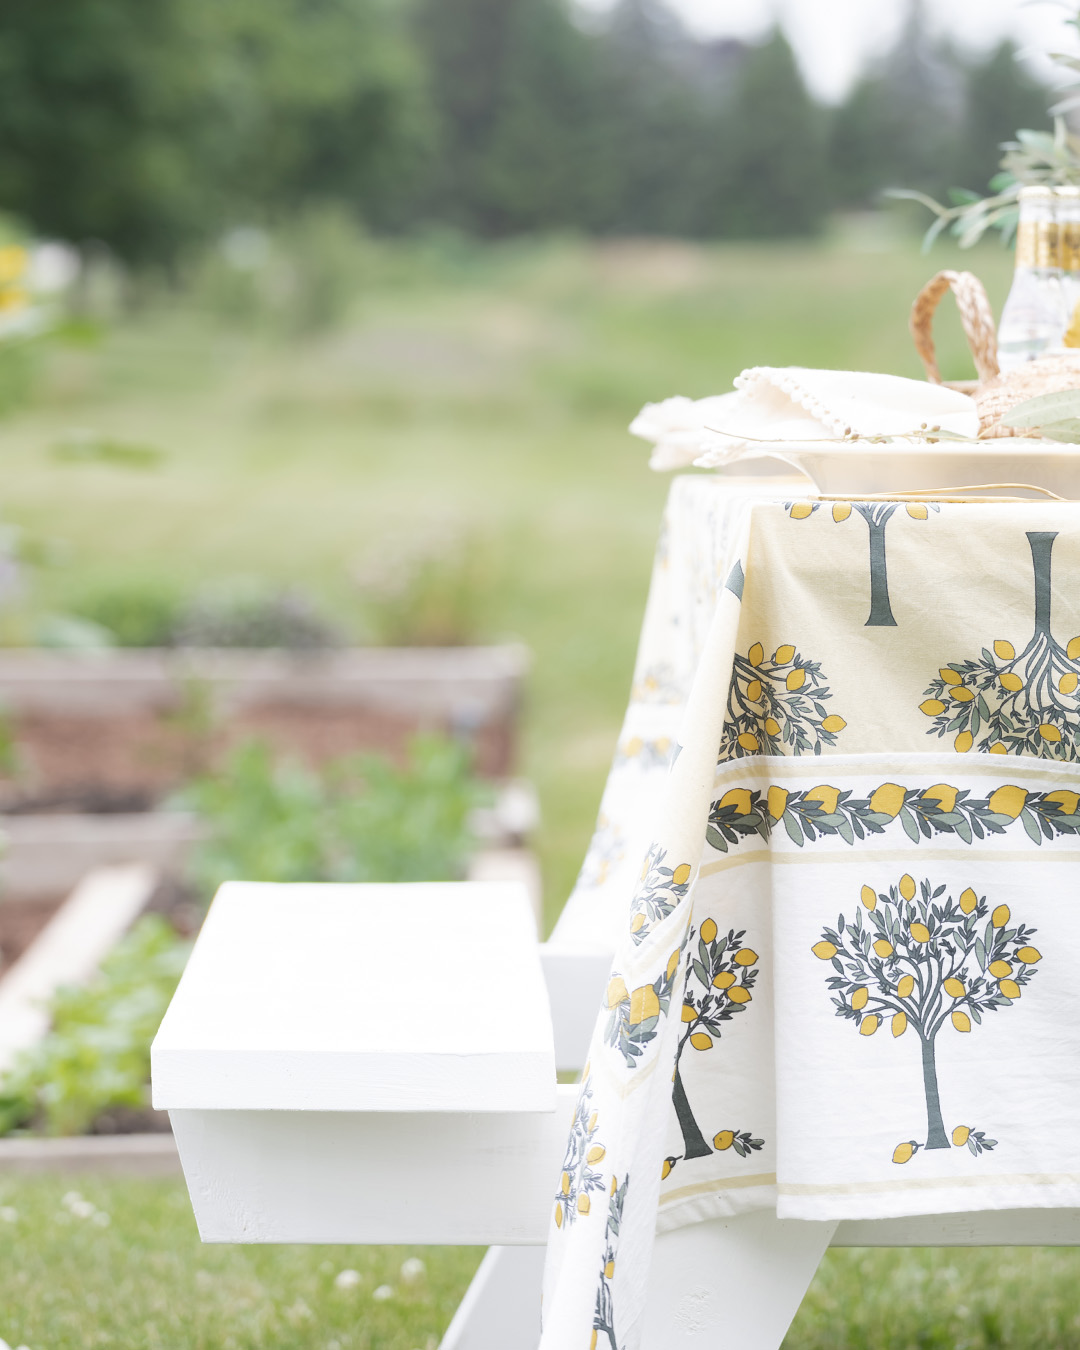 I set up our newly refreshed picnic table the other day in our freshly-tidied garden with the most lovely summer table linen finds from my friends at Kochi Stores. Please enjoy these photos of our picnic in the garden!